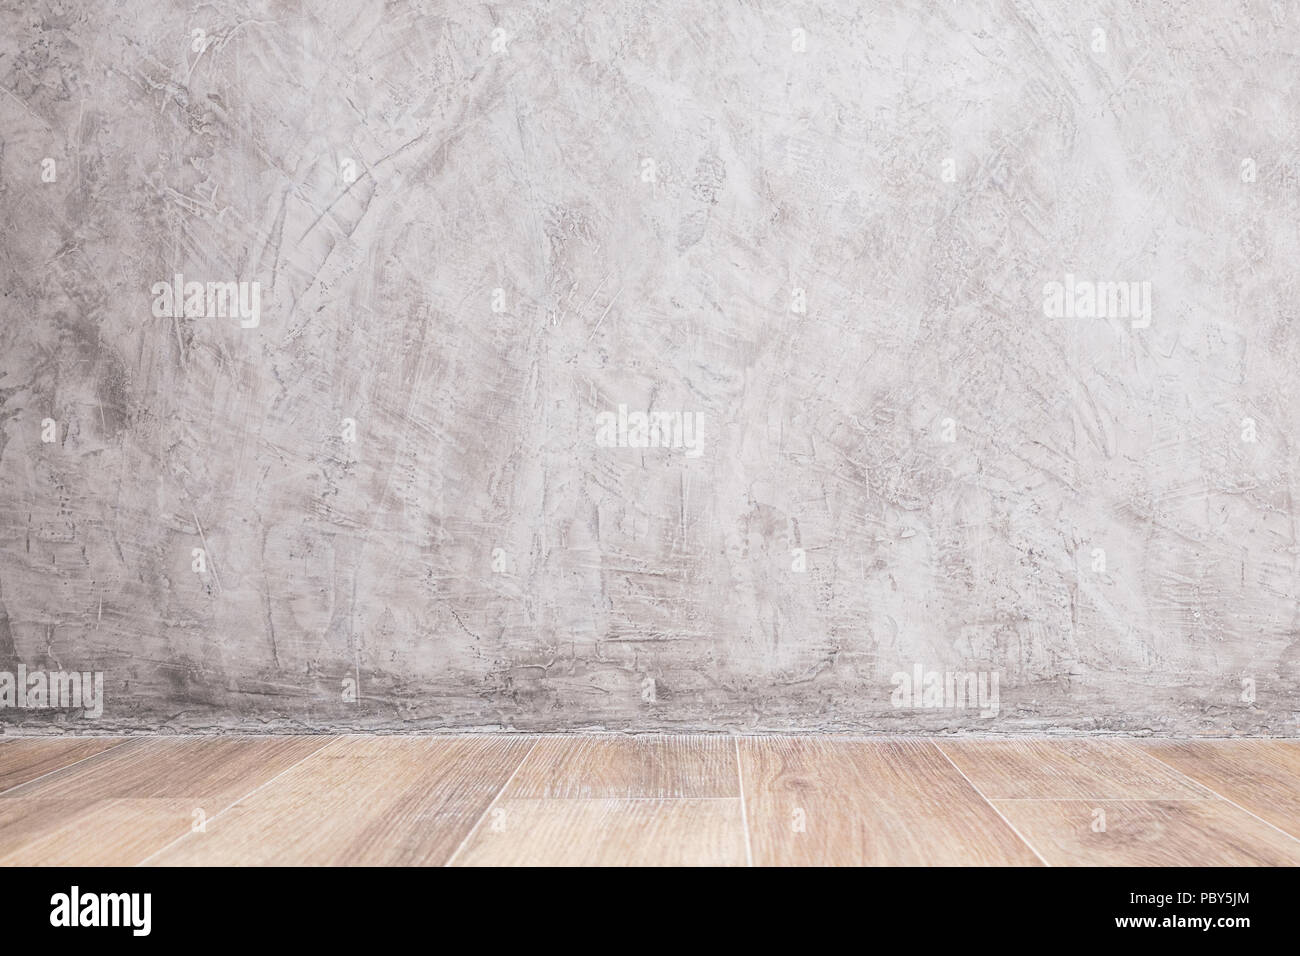 Blank Interior Room With Paint Concrete Wall And Wooden